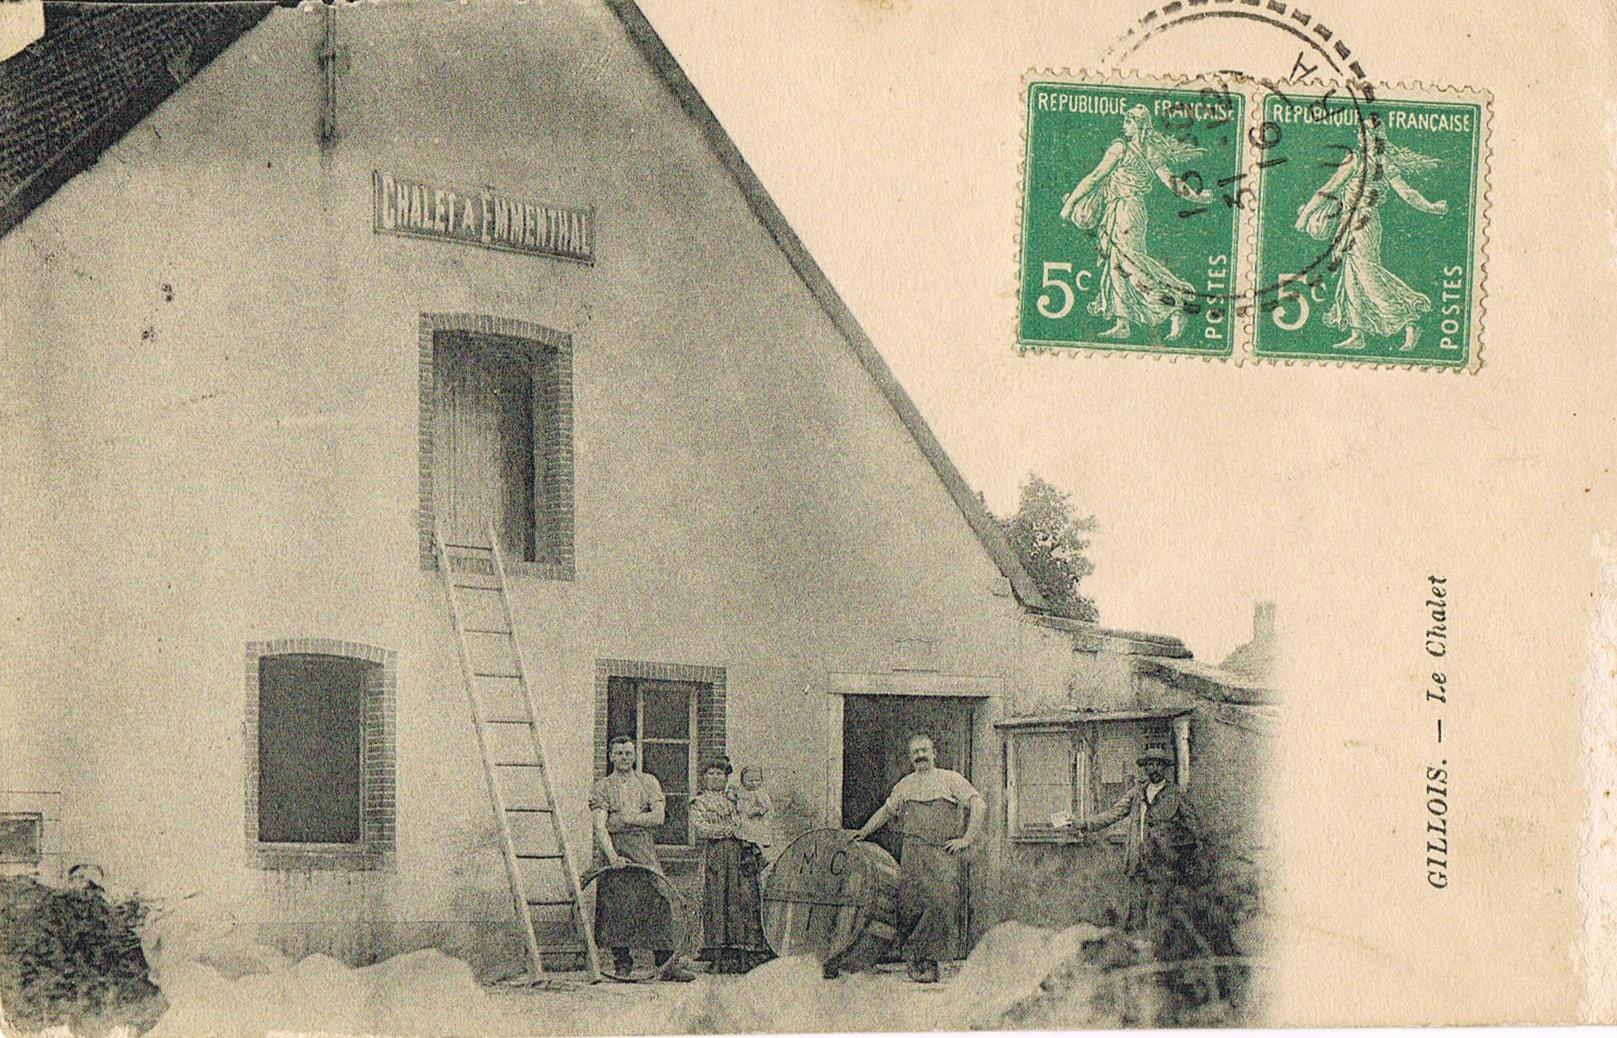 Chalets, Fruitières et Fromageries